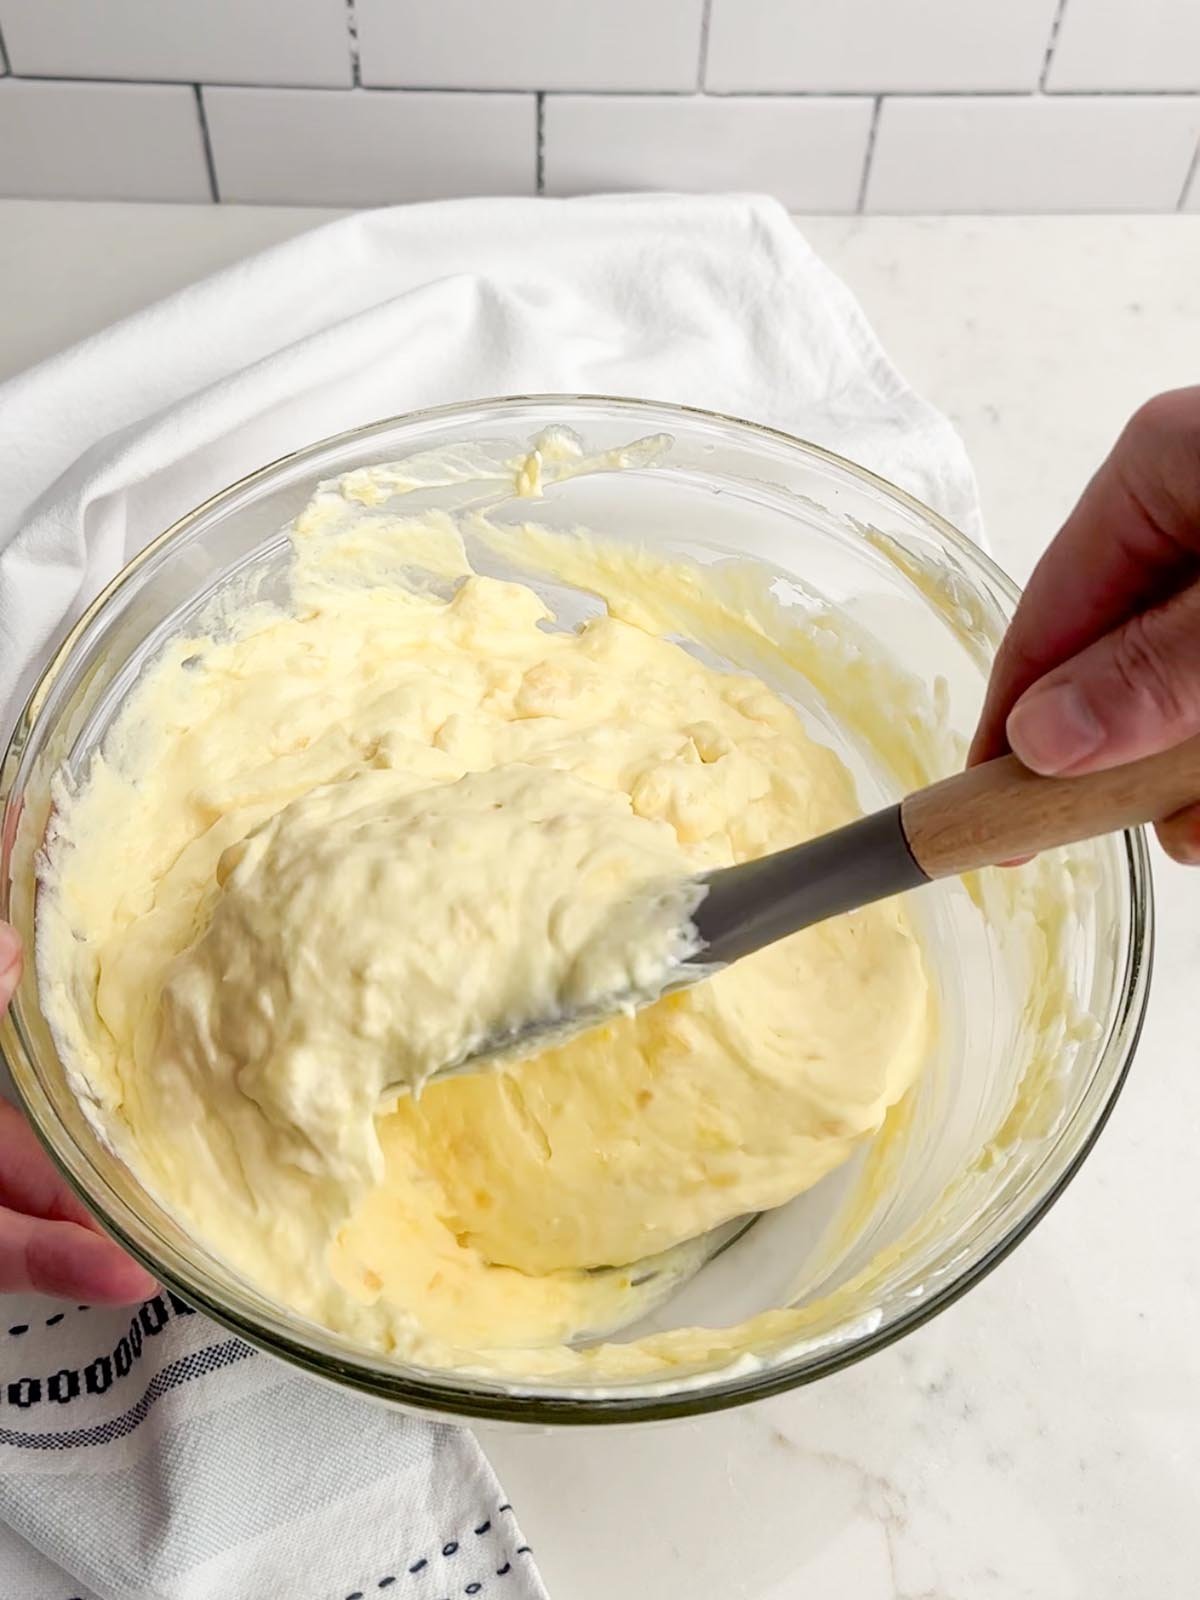 hand holding a spatula folding Cool Whip into the pineapple cream cheese mixture